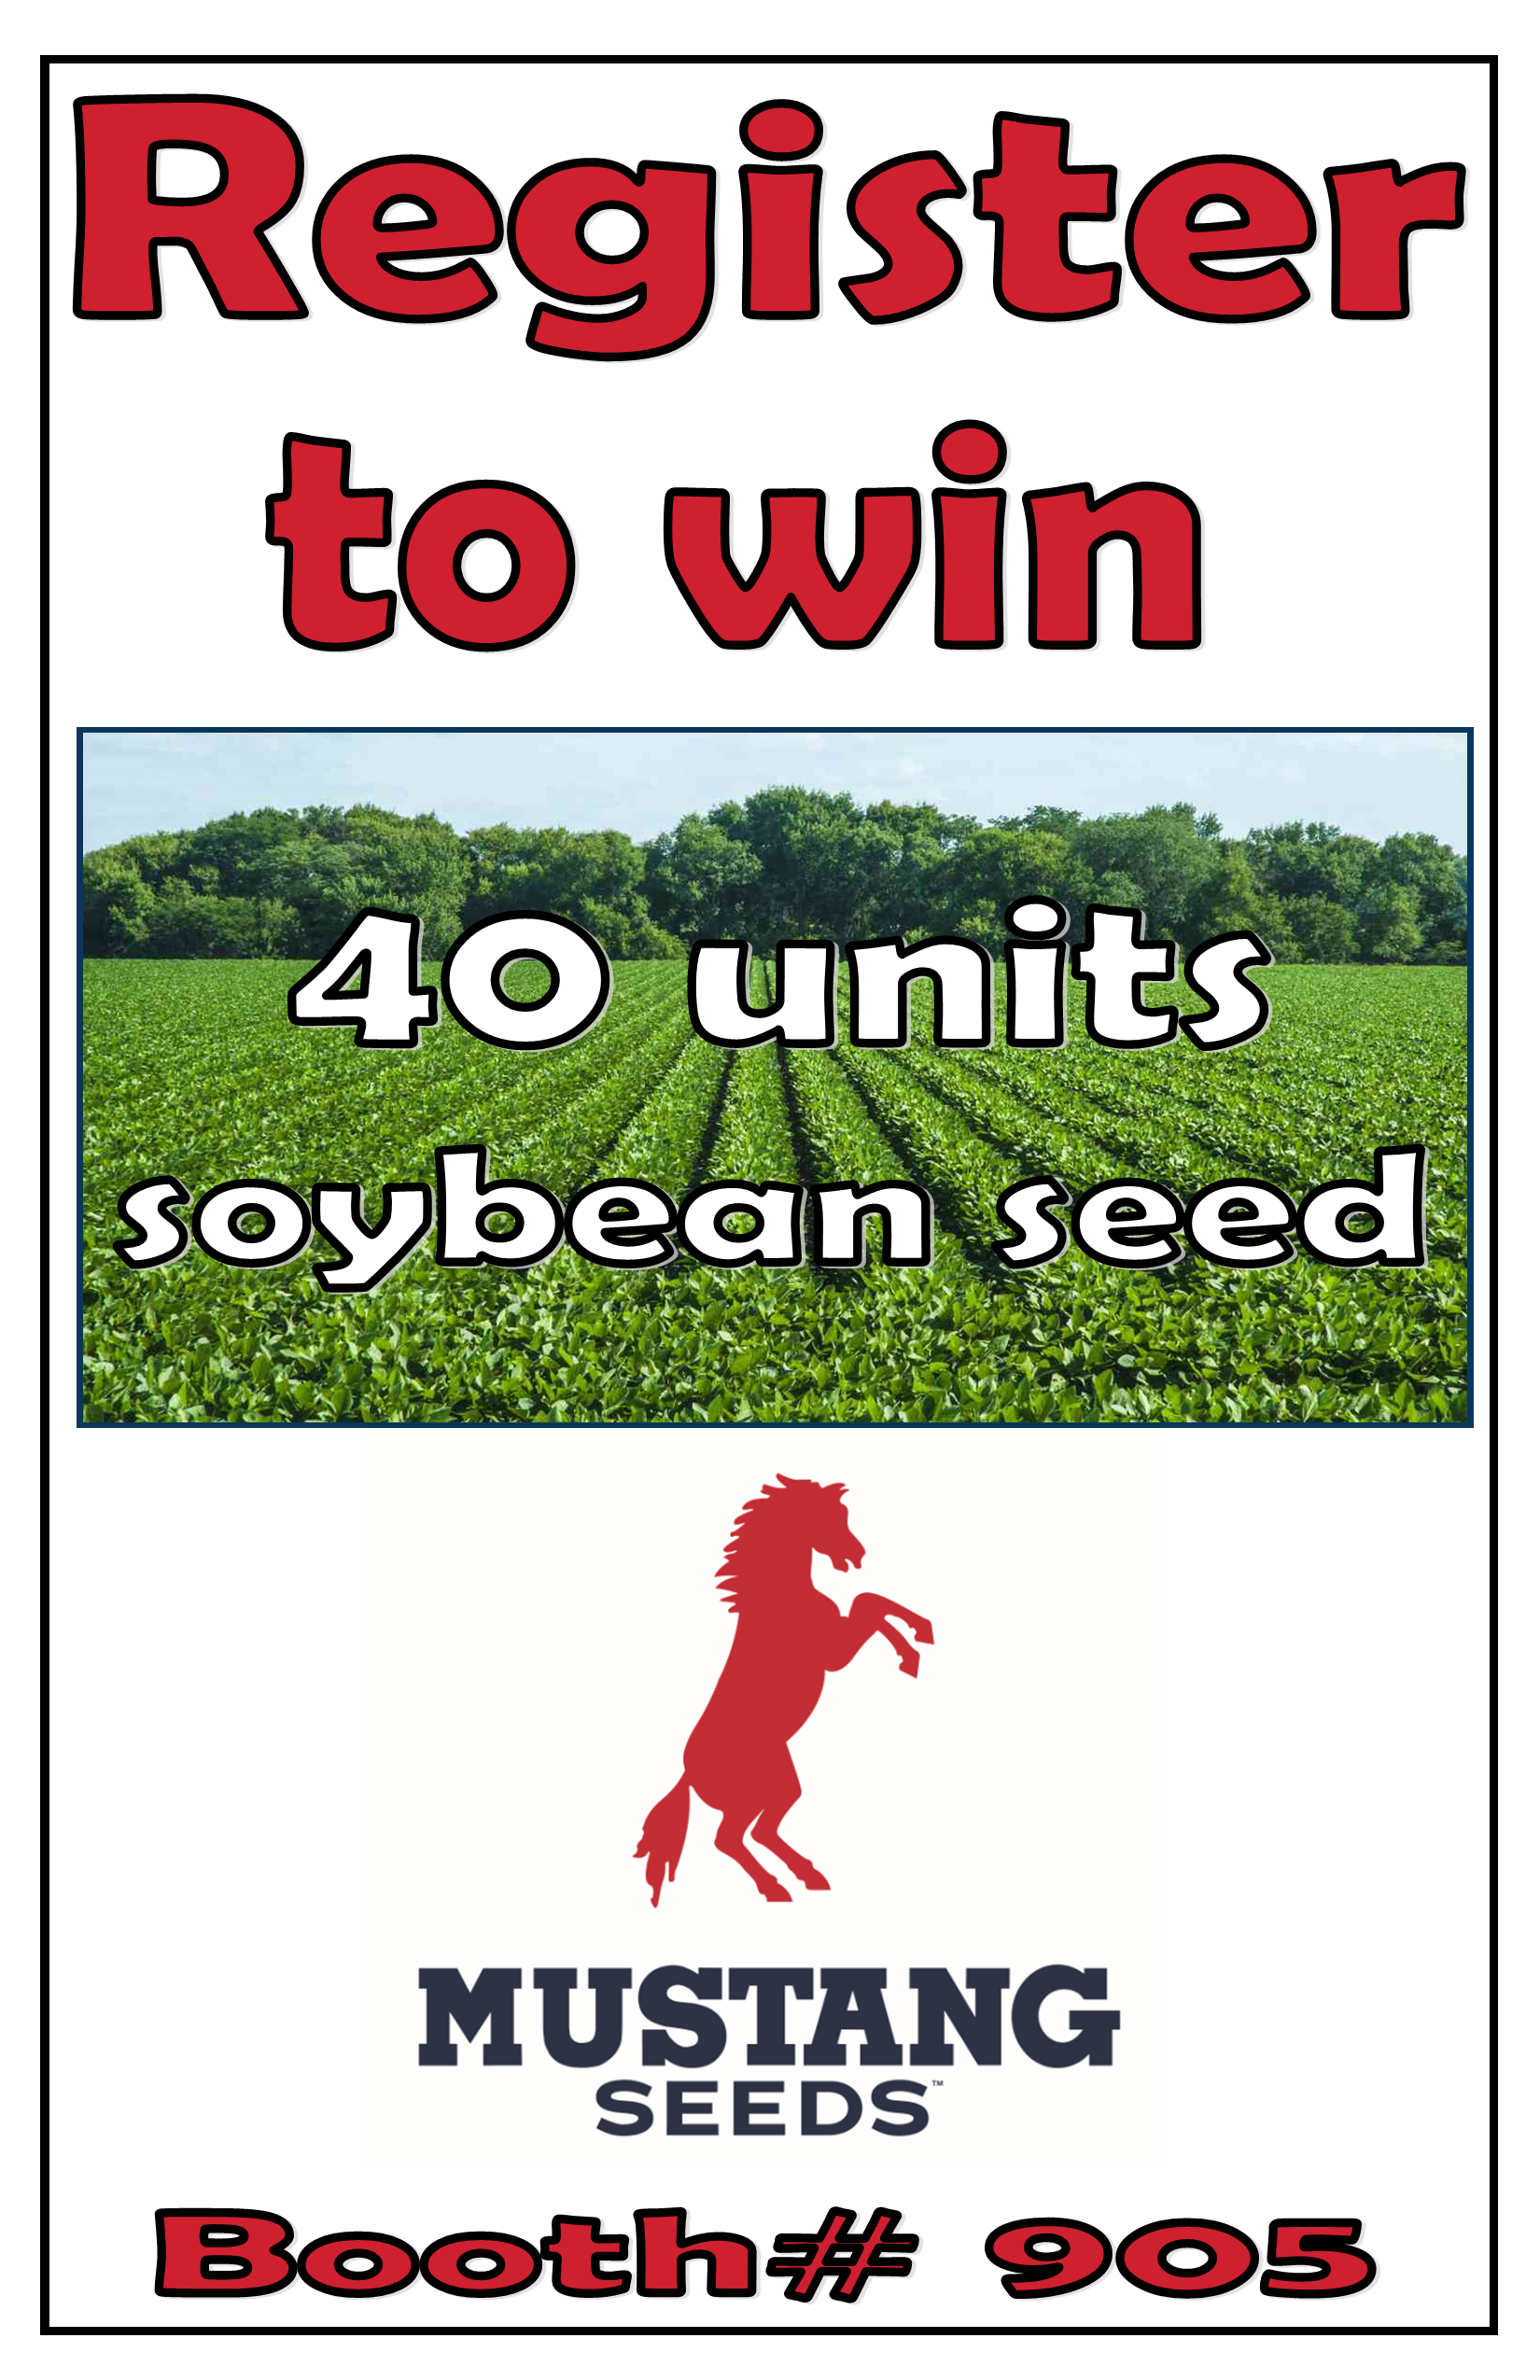 Register to Win at Midland's booth (#1220) 16 Units Seeed Corn, Winner's choice of hybrid! Seed will be delivered to the winner or nearby Midland Seed dealer. Apporximate value is $4800